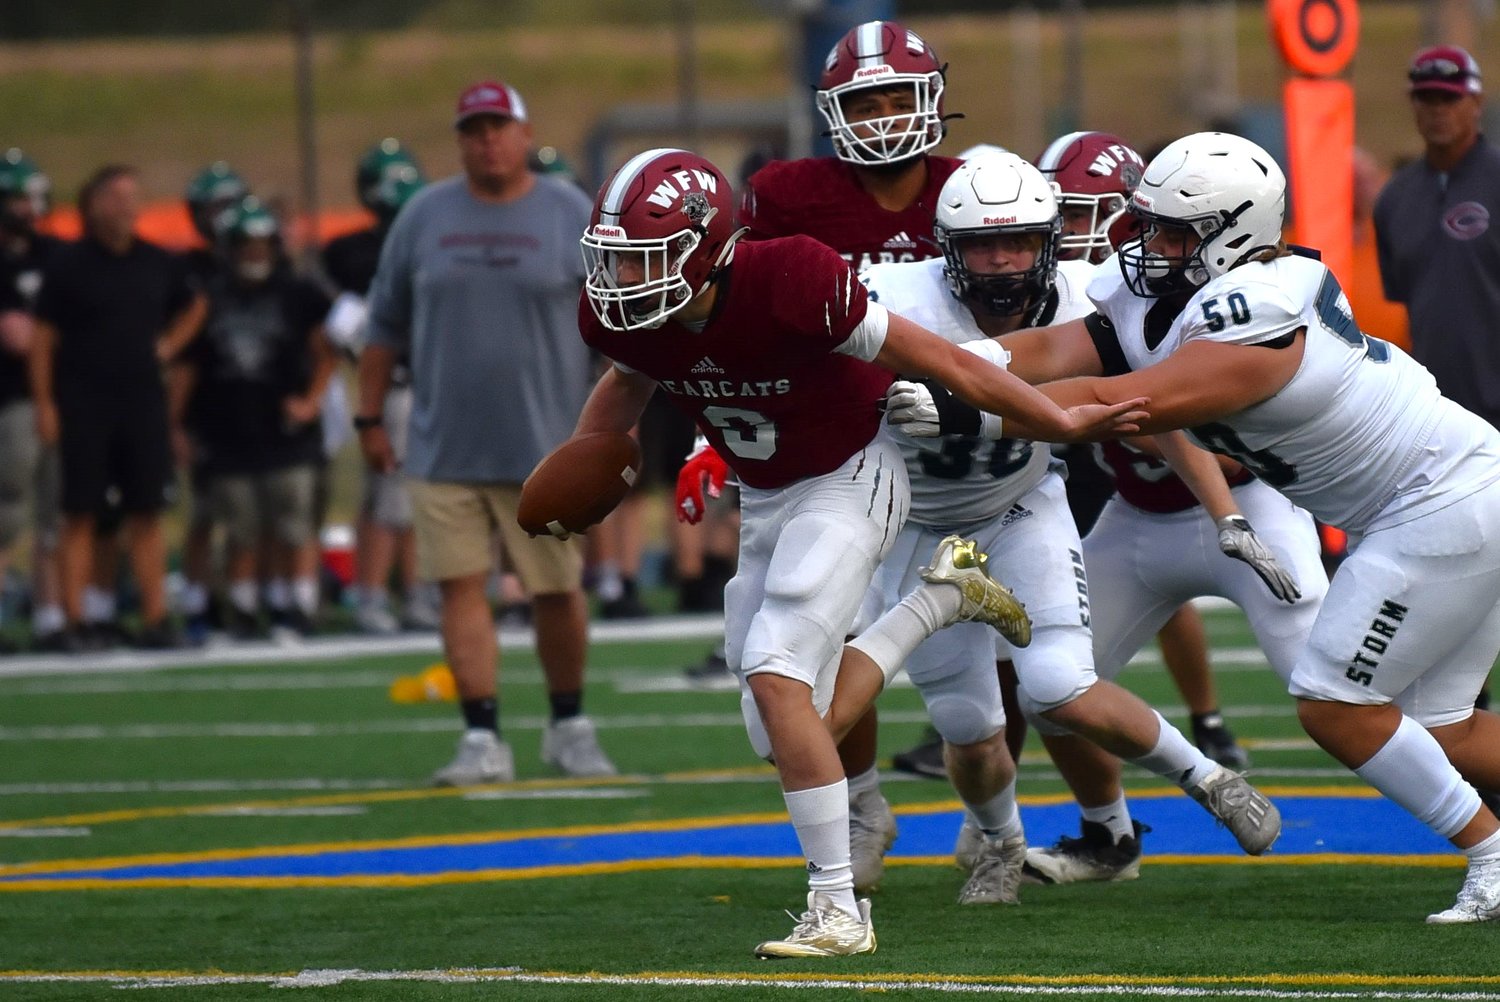 W.F. West quarterback Gavin Fugate breaks away from a would-be tackler during the Bearcats' offensive set against 4A Skyview, at a jamboree at Kelso High School on Aug. 26.